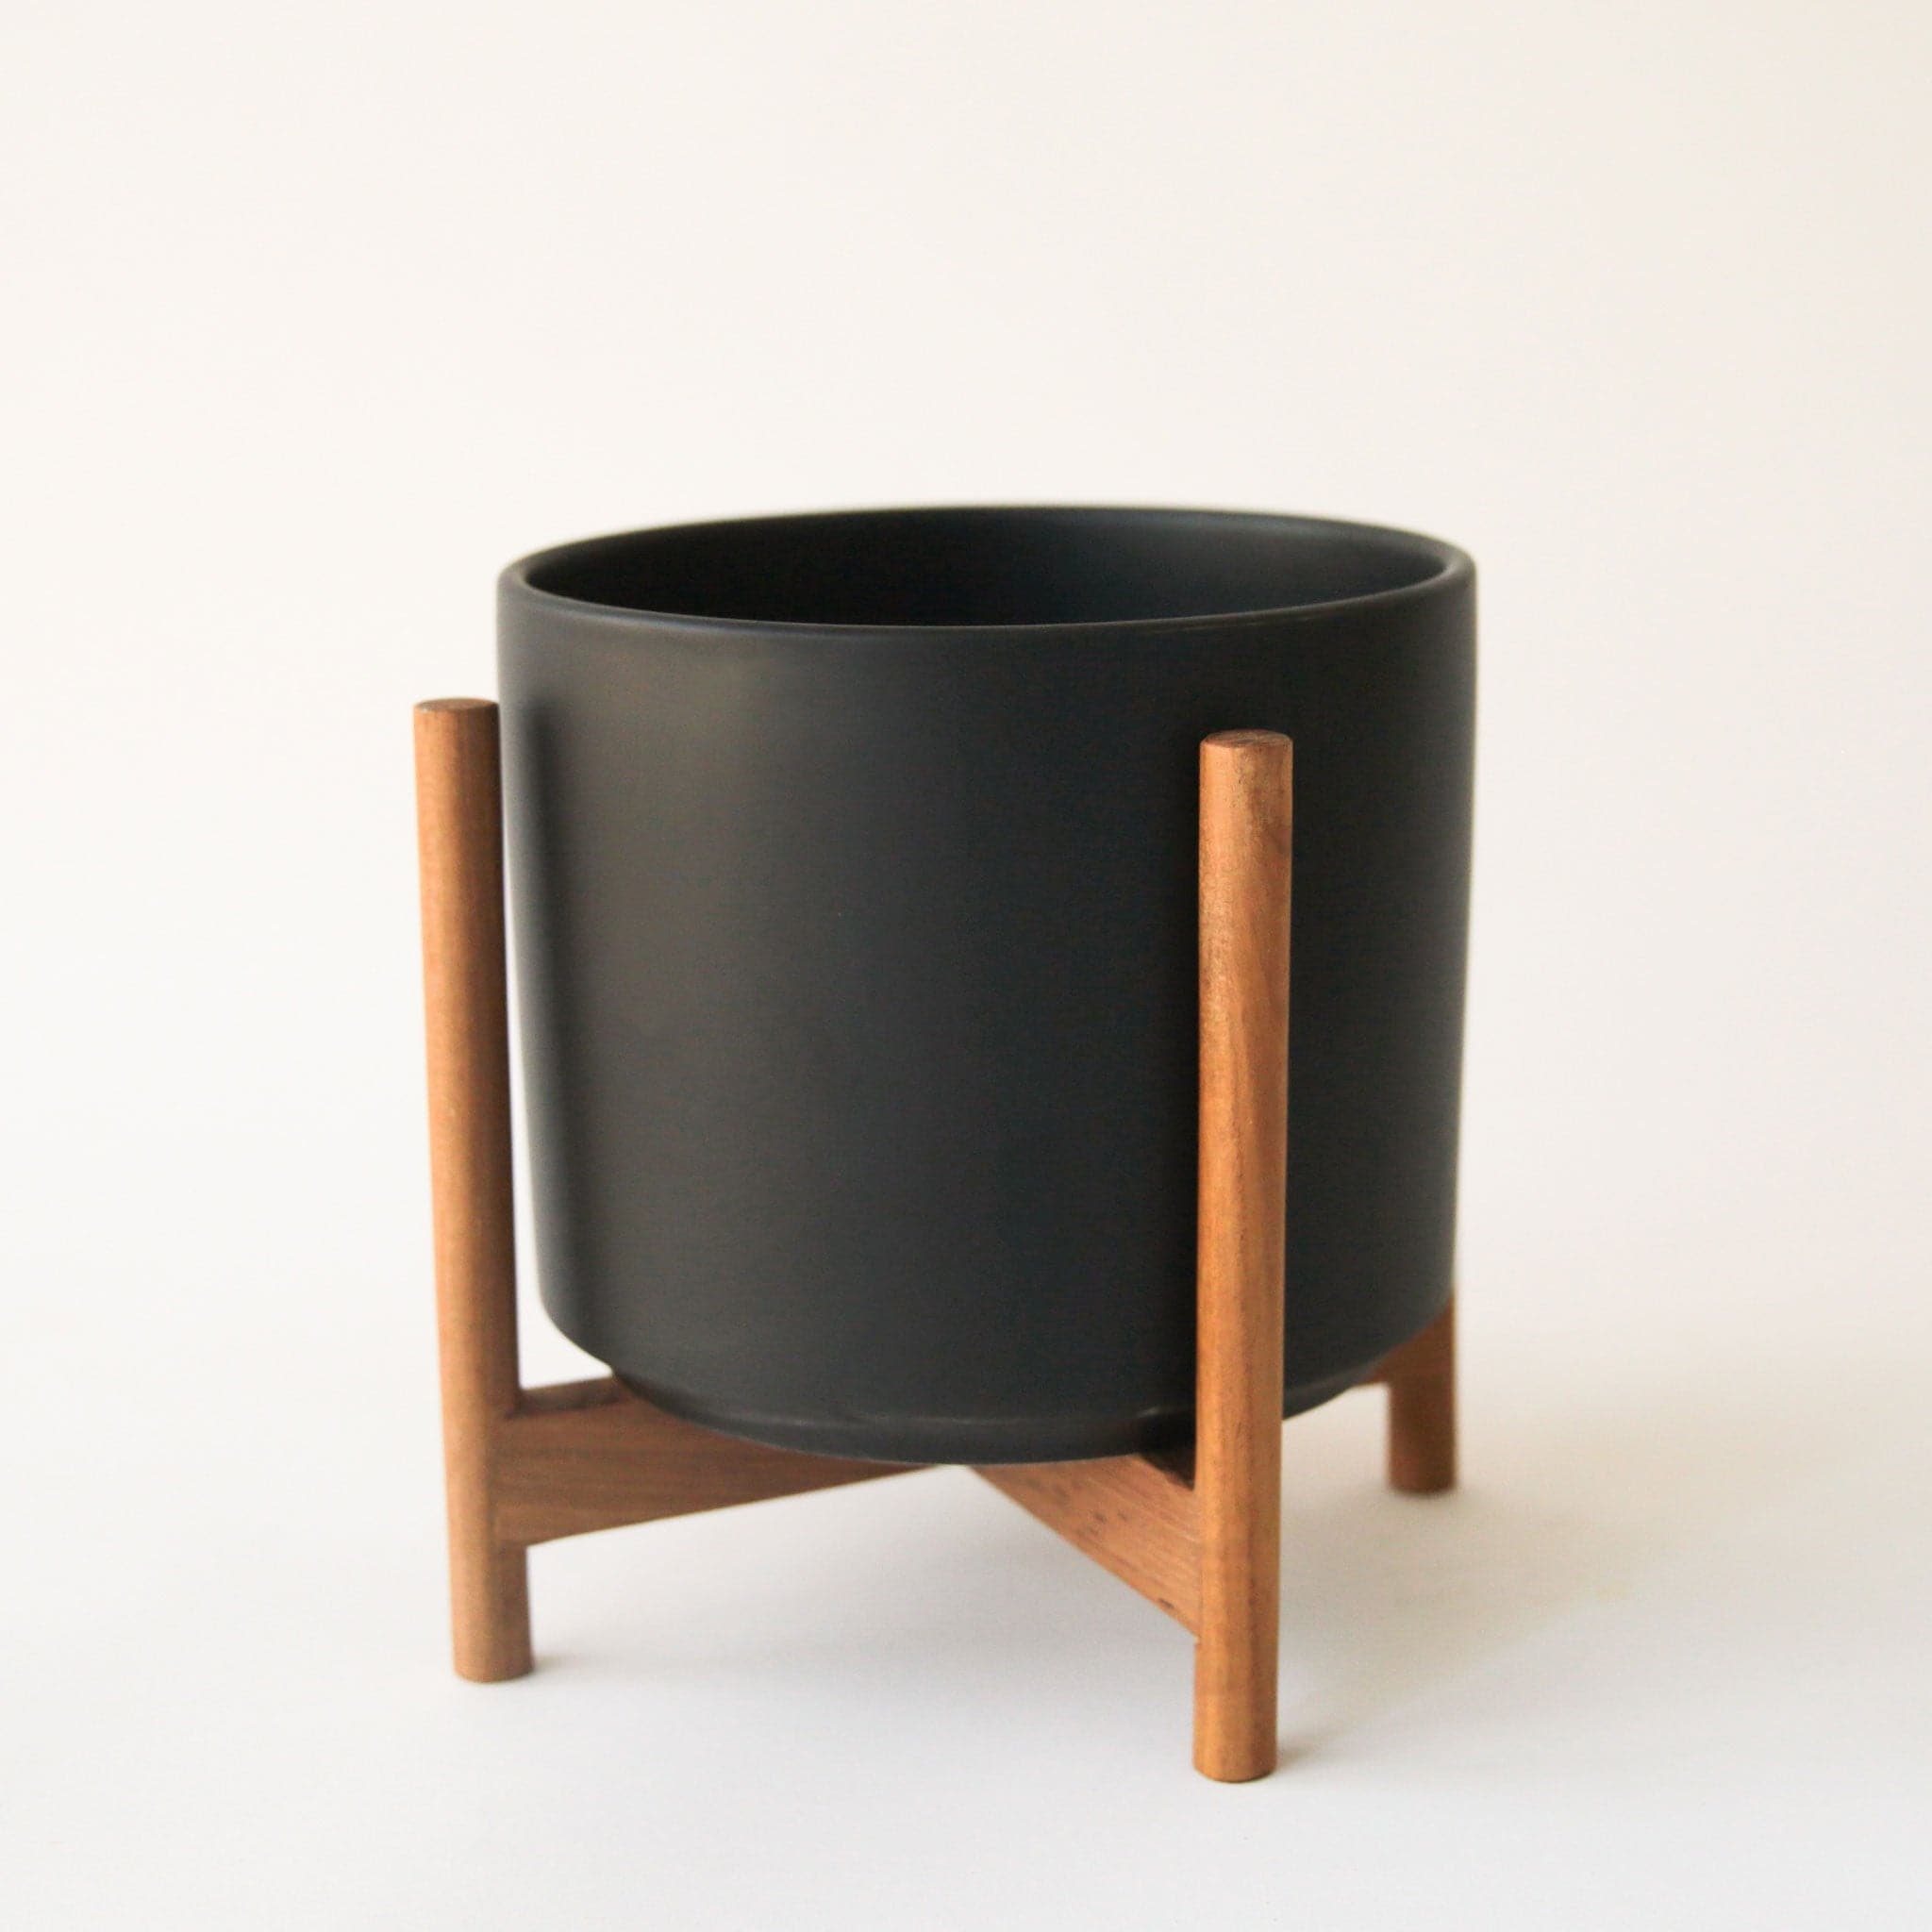 A black ceramic pot on a wooden stand with four legs.